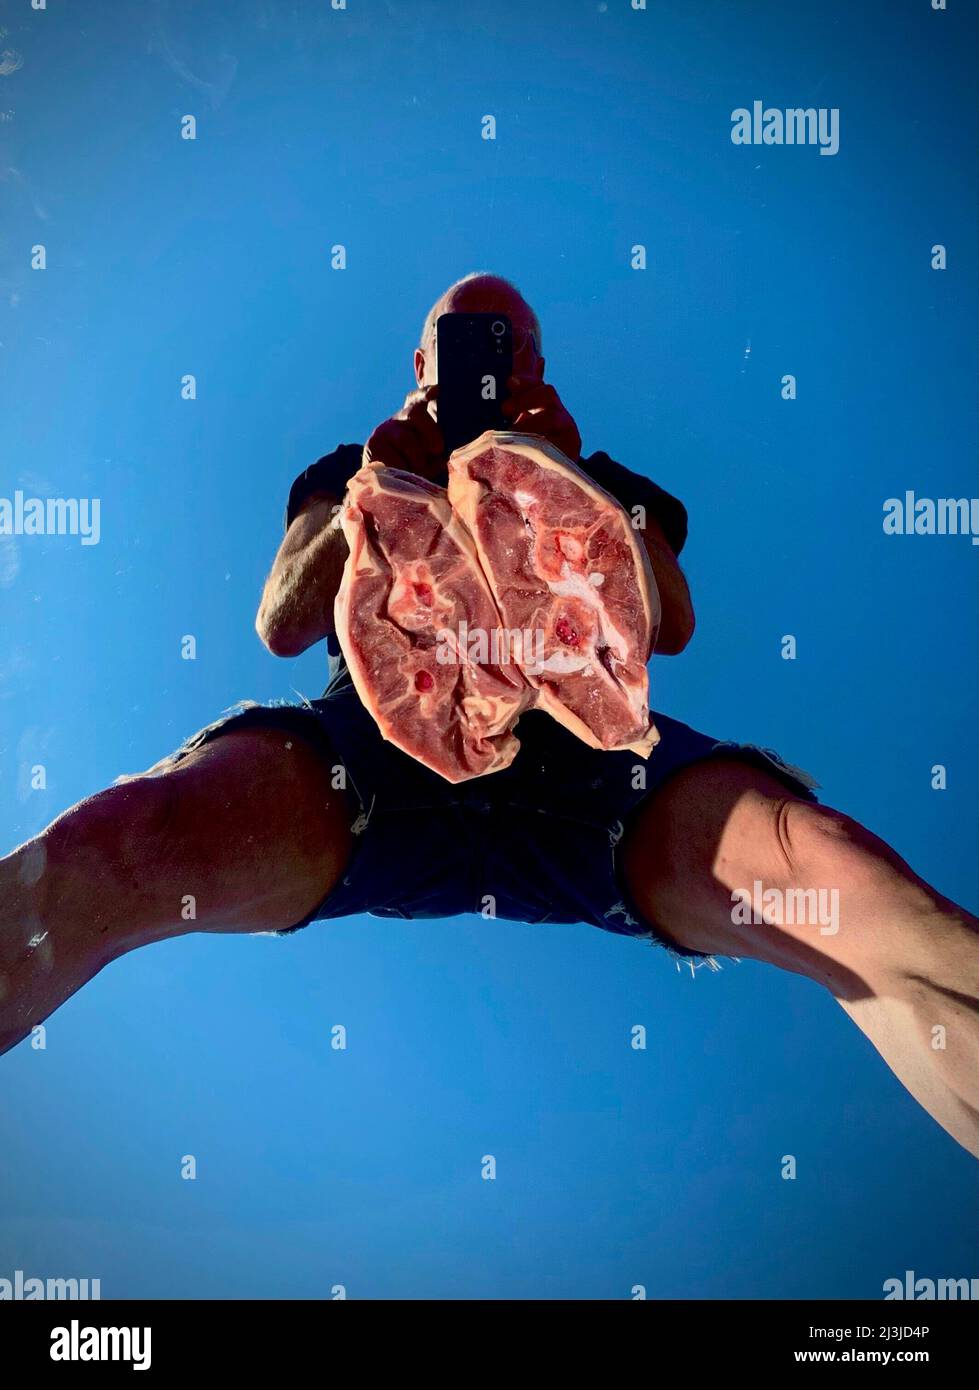 Man taking a selfie with steaks for barbecue. Stock Photo